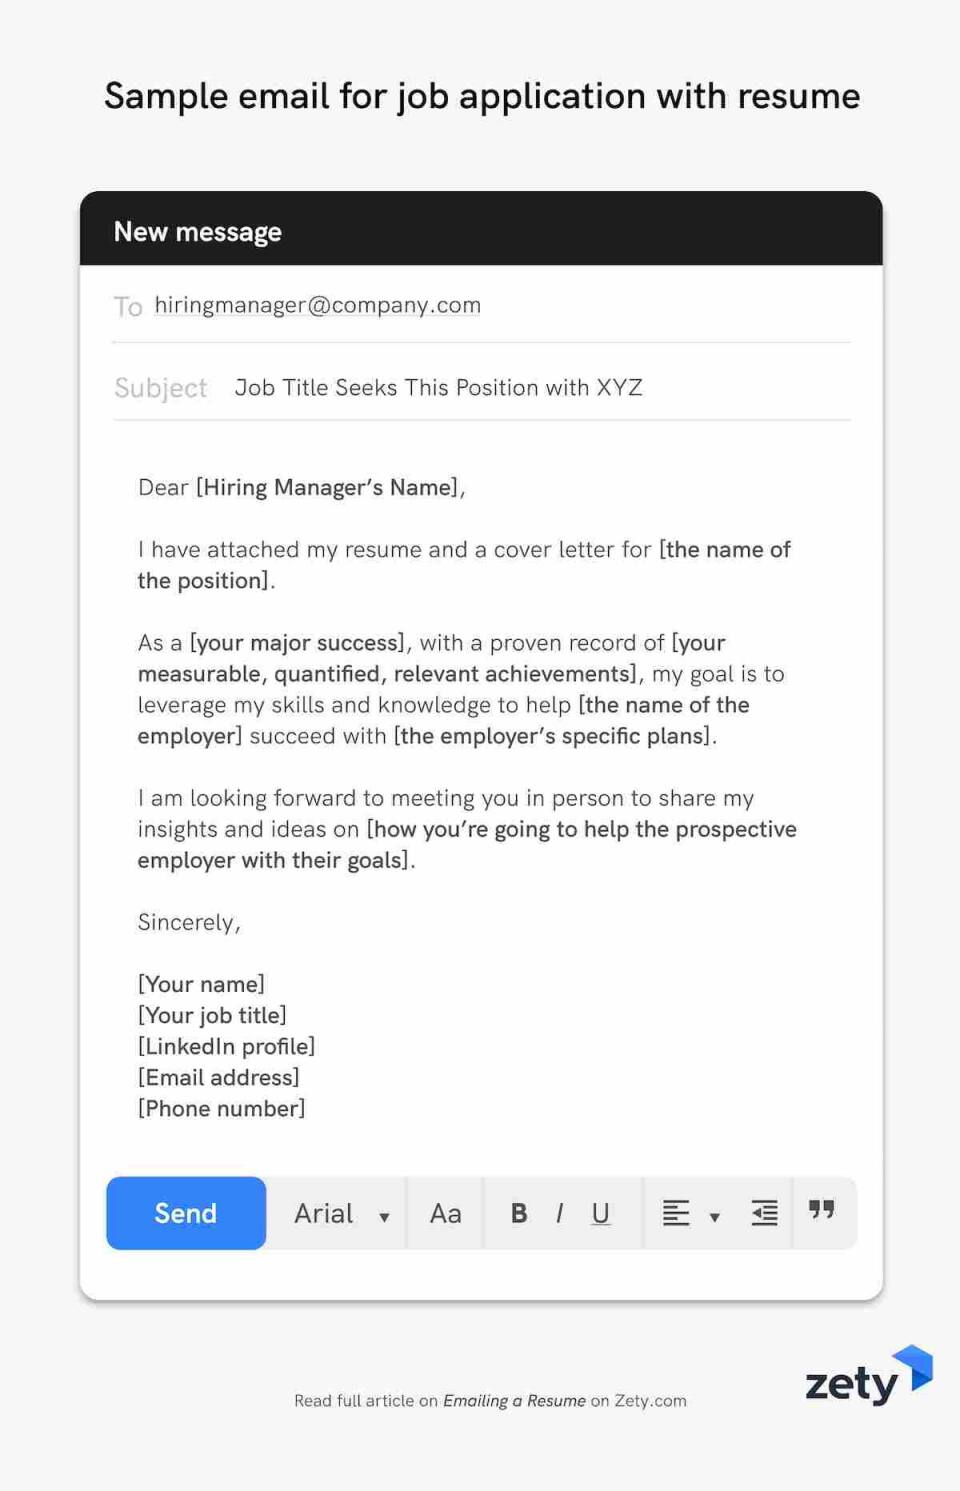 how to write job application email with resume